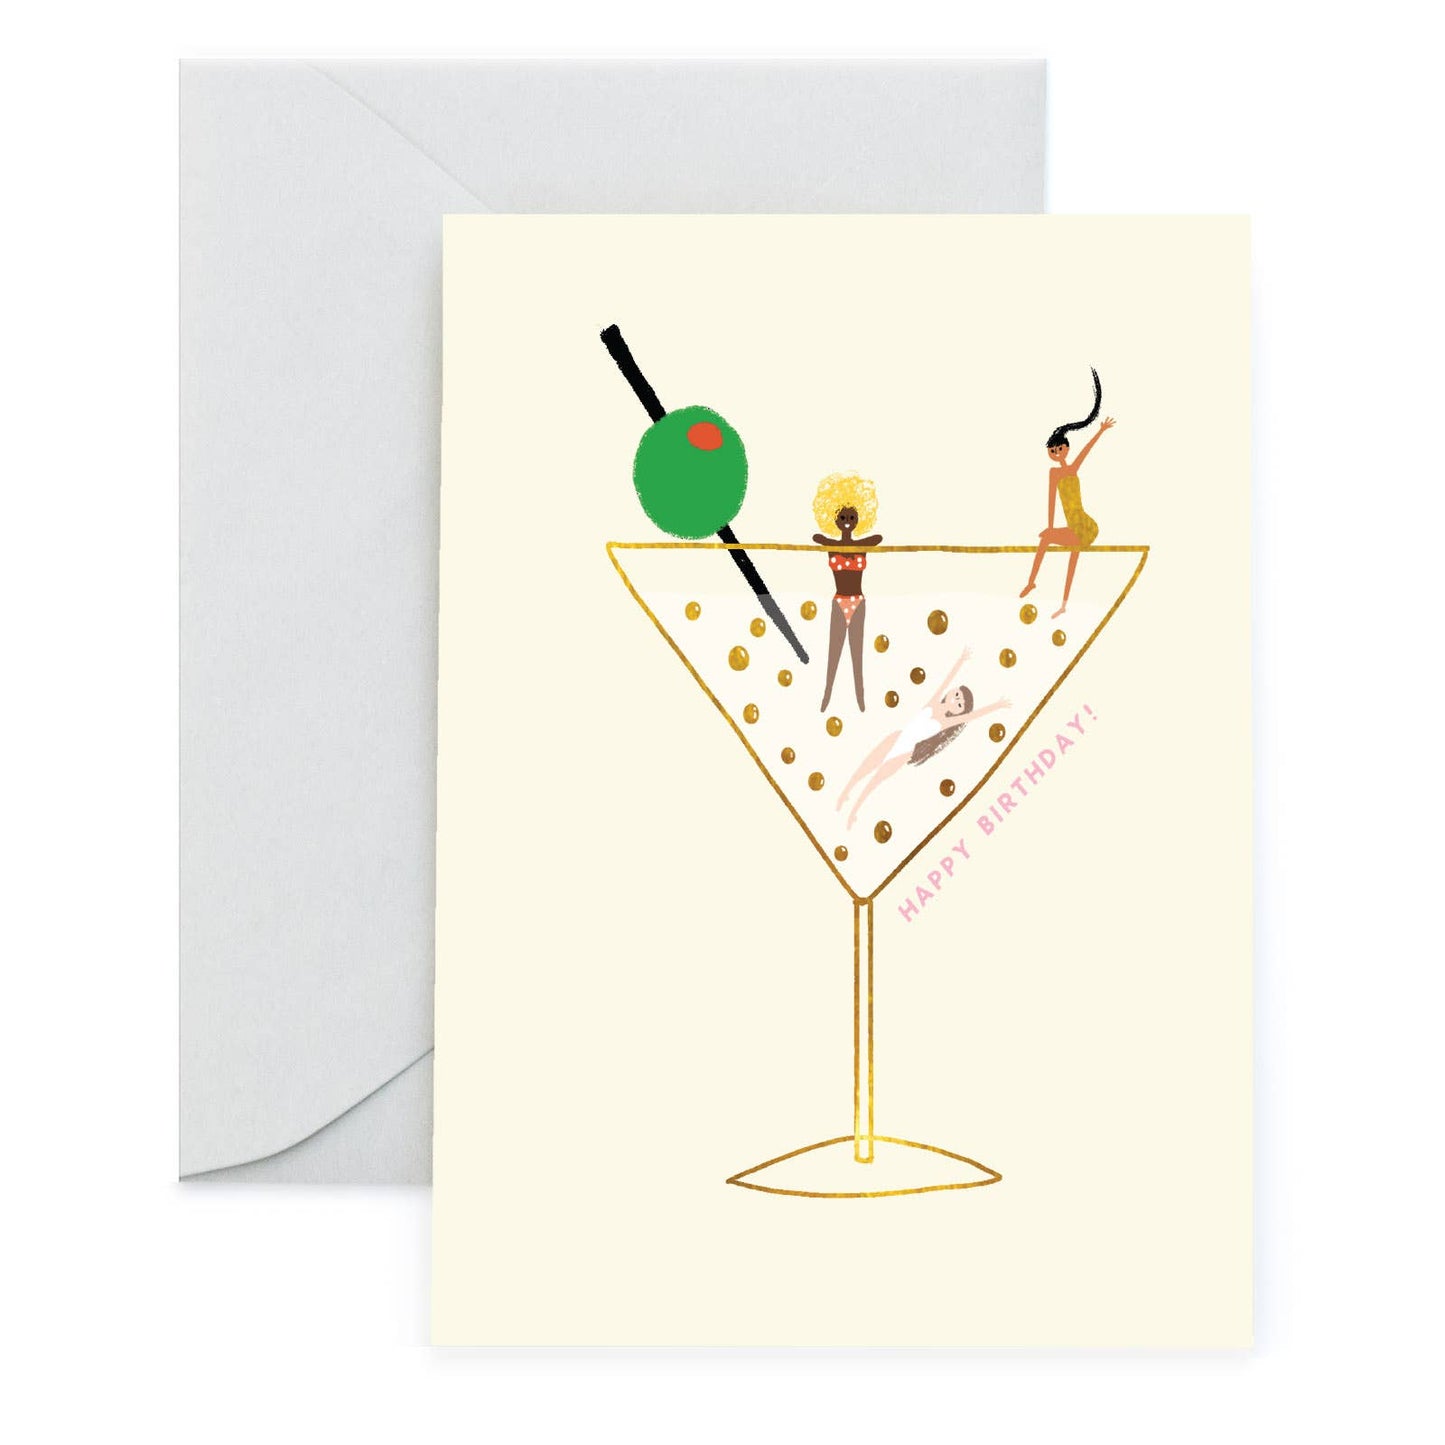 greeting card with image of a martini glass with an olive on a toothpick on the left and 3 girls swimming/hanging out inside the glass. Along the right side of the glass it reads "Happy Birthday!"